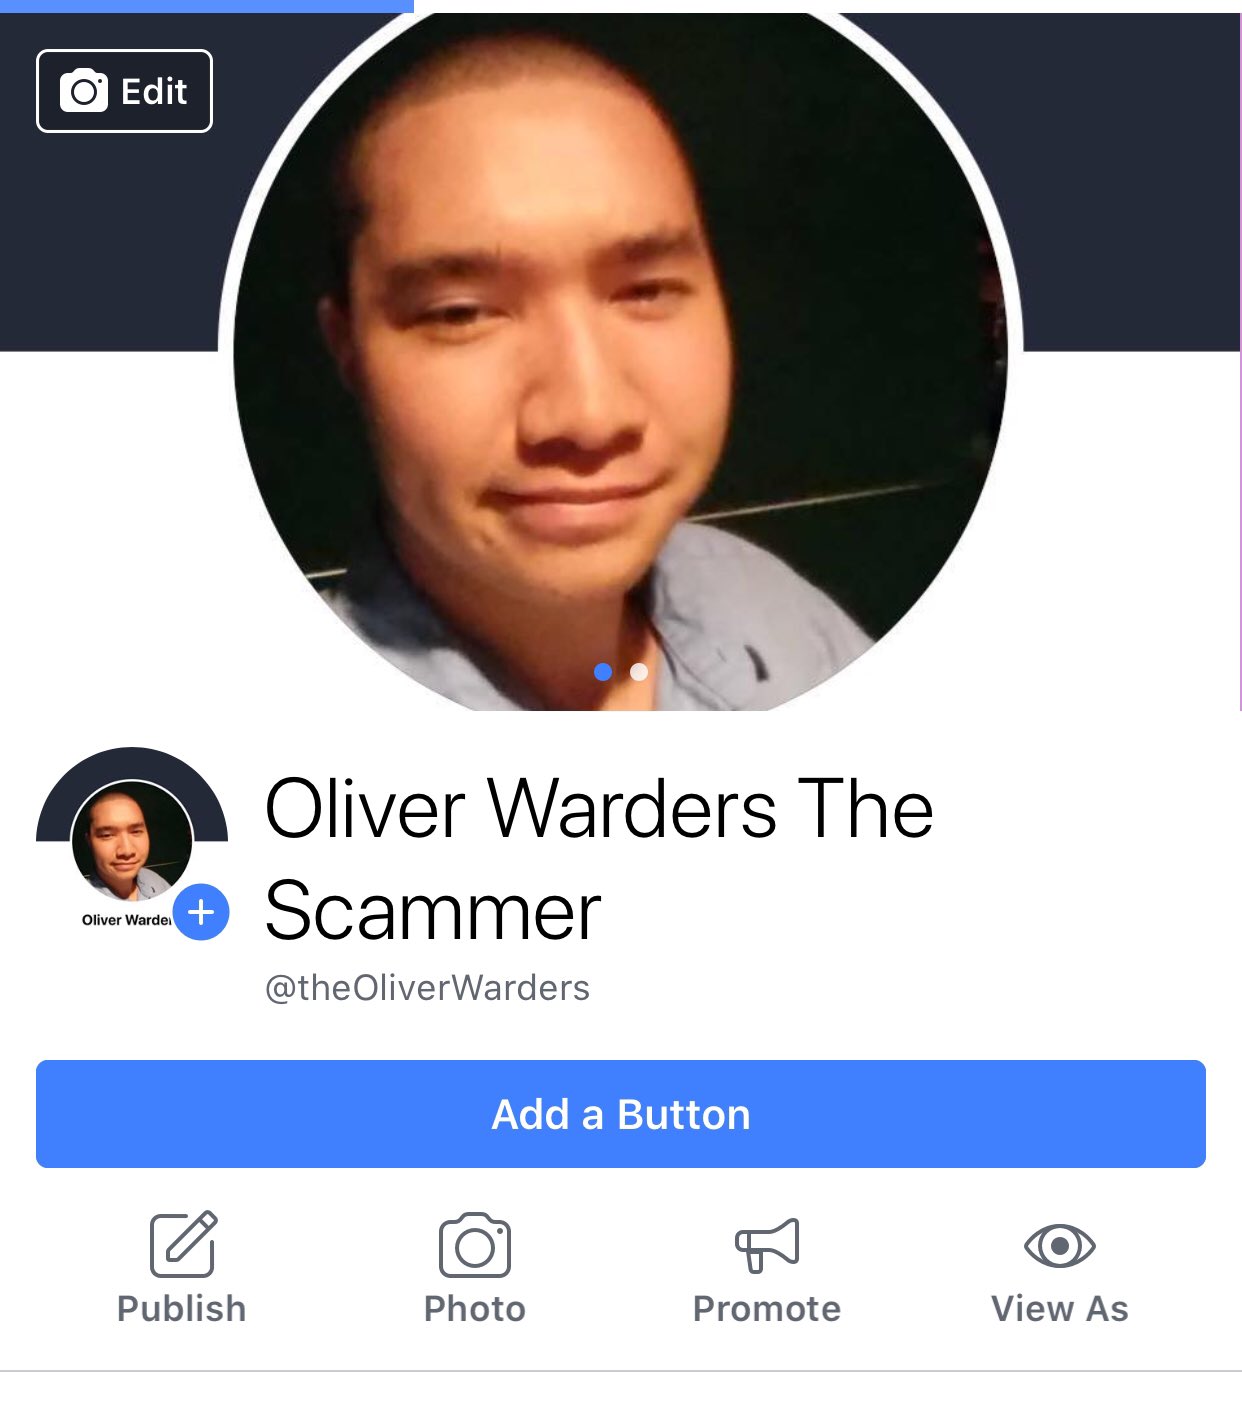 OLIVER WARDERS THE CRIMINAL EXTORTIONIST & SCAMMER